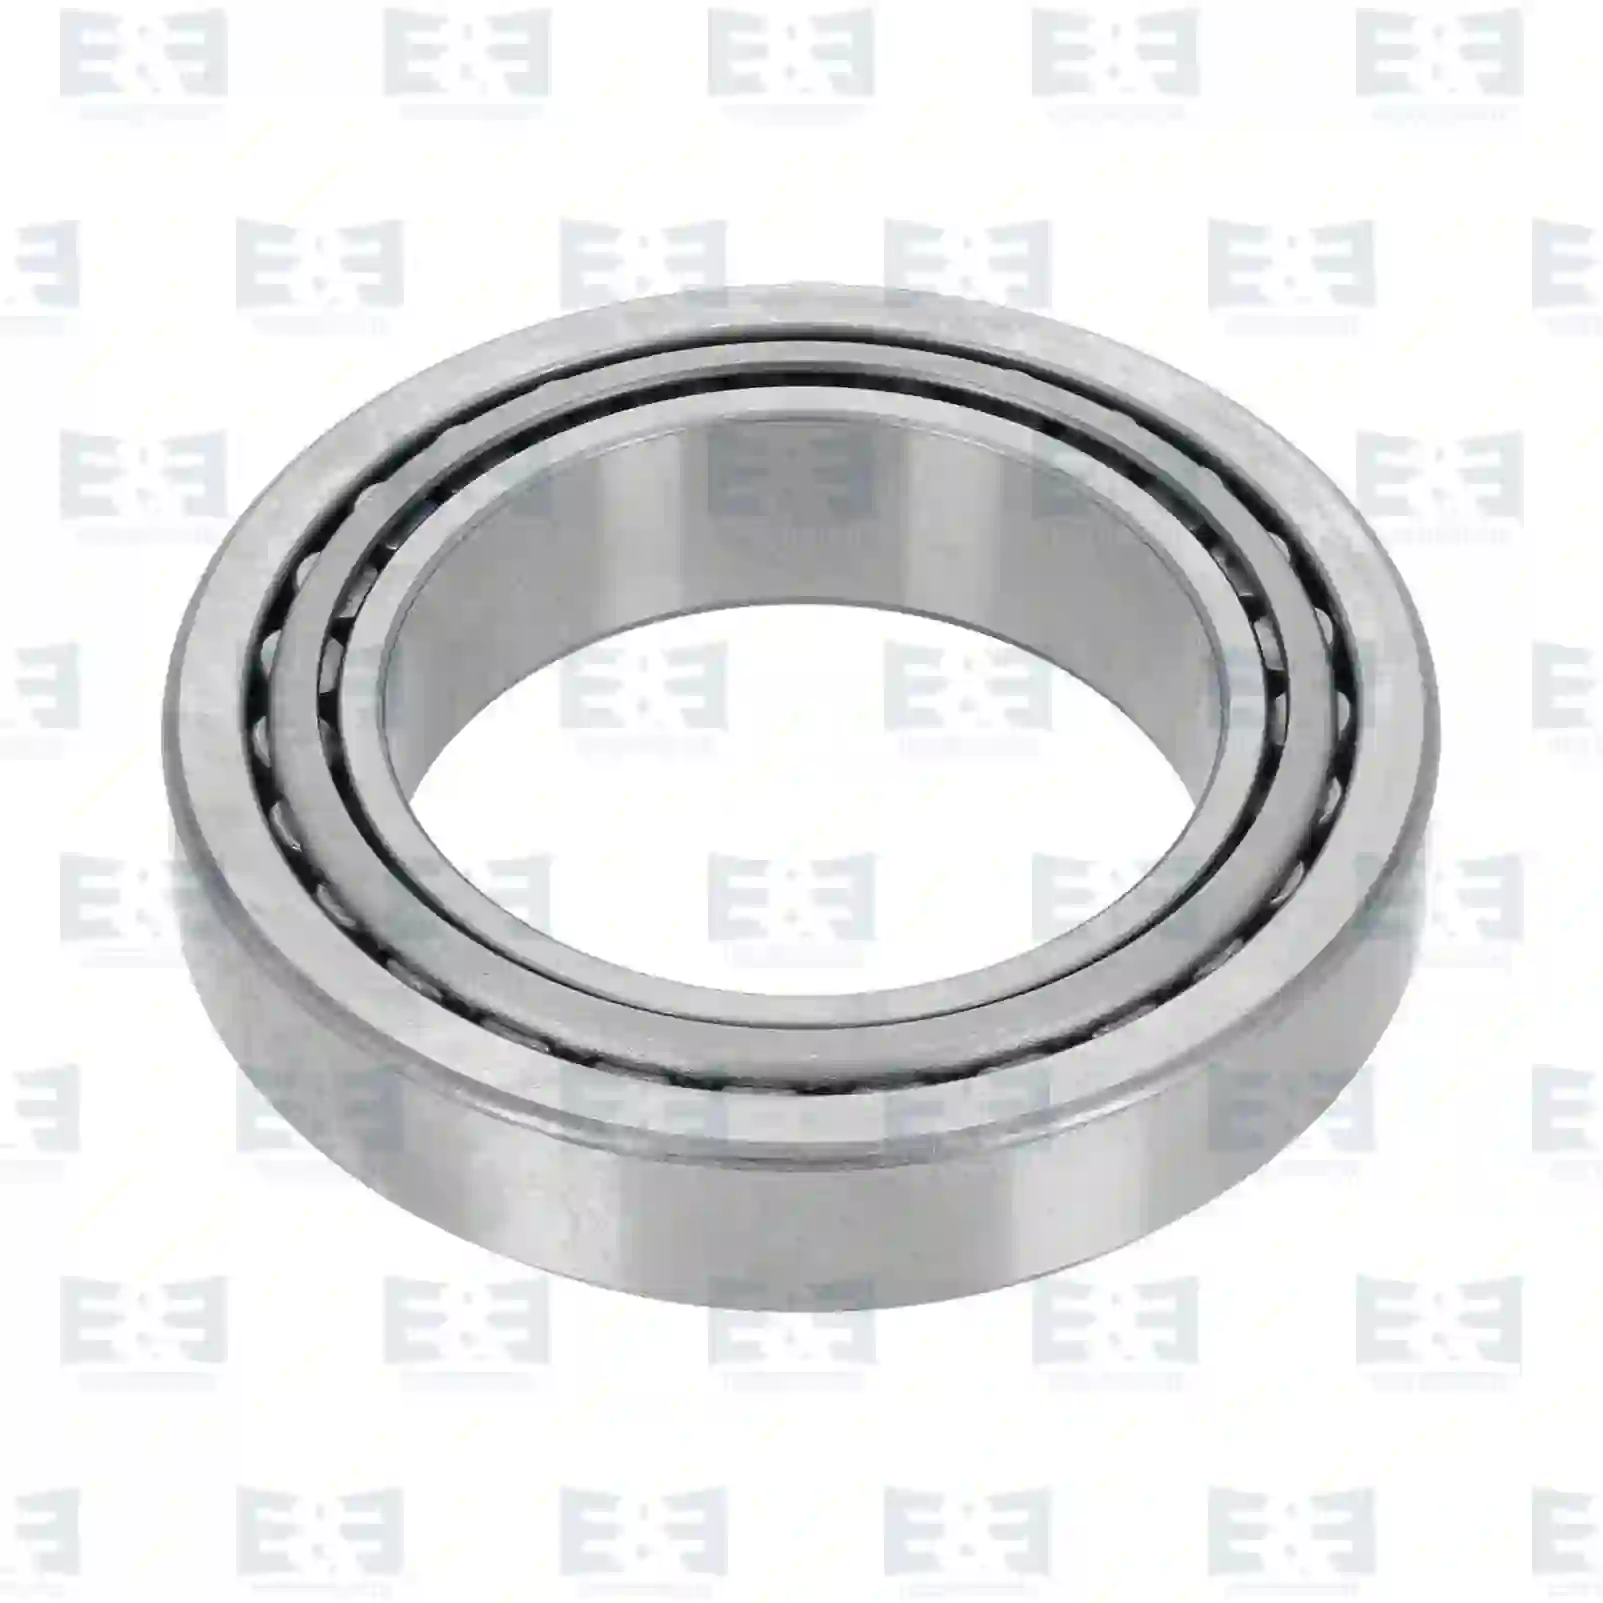 Rear Axle, Complete Tapered roller bearing, EE No 2E2270710 ,  oem no:0059811505, 005092803, 60115335, 01125572, 5010443903, 60115335, 06324800060, 06324801200, 06324811200, 06324890060, 06324890091, 81934200150, 87523001201, 000720032017, 0059811405, 0059811505, 0059811605, 0159810005, 0159810805, 0179818205, 0023336246, 5010443903, 7400184623, 1524964, 184623, 2V5501283, ZG02982-0008 E&E Truck Spare Parts | Truck Spare Parts, Auotomotive Spare Parts